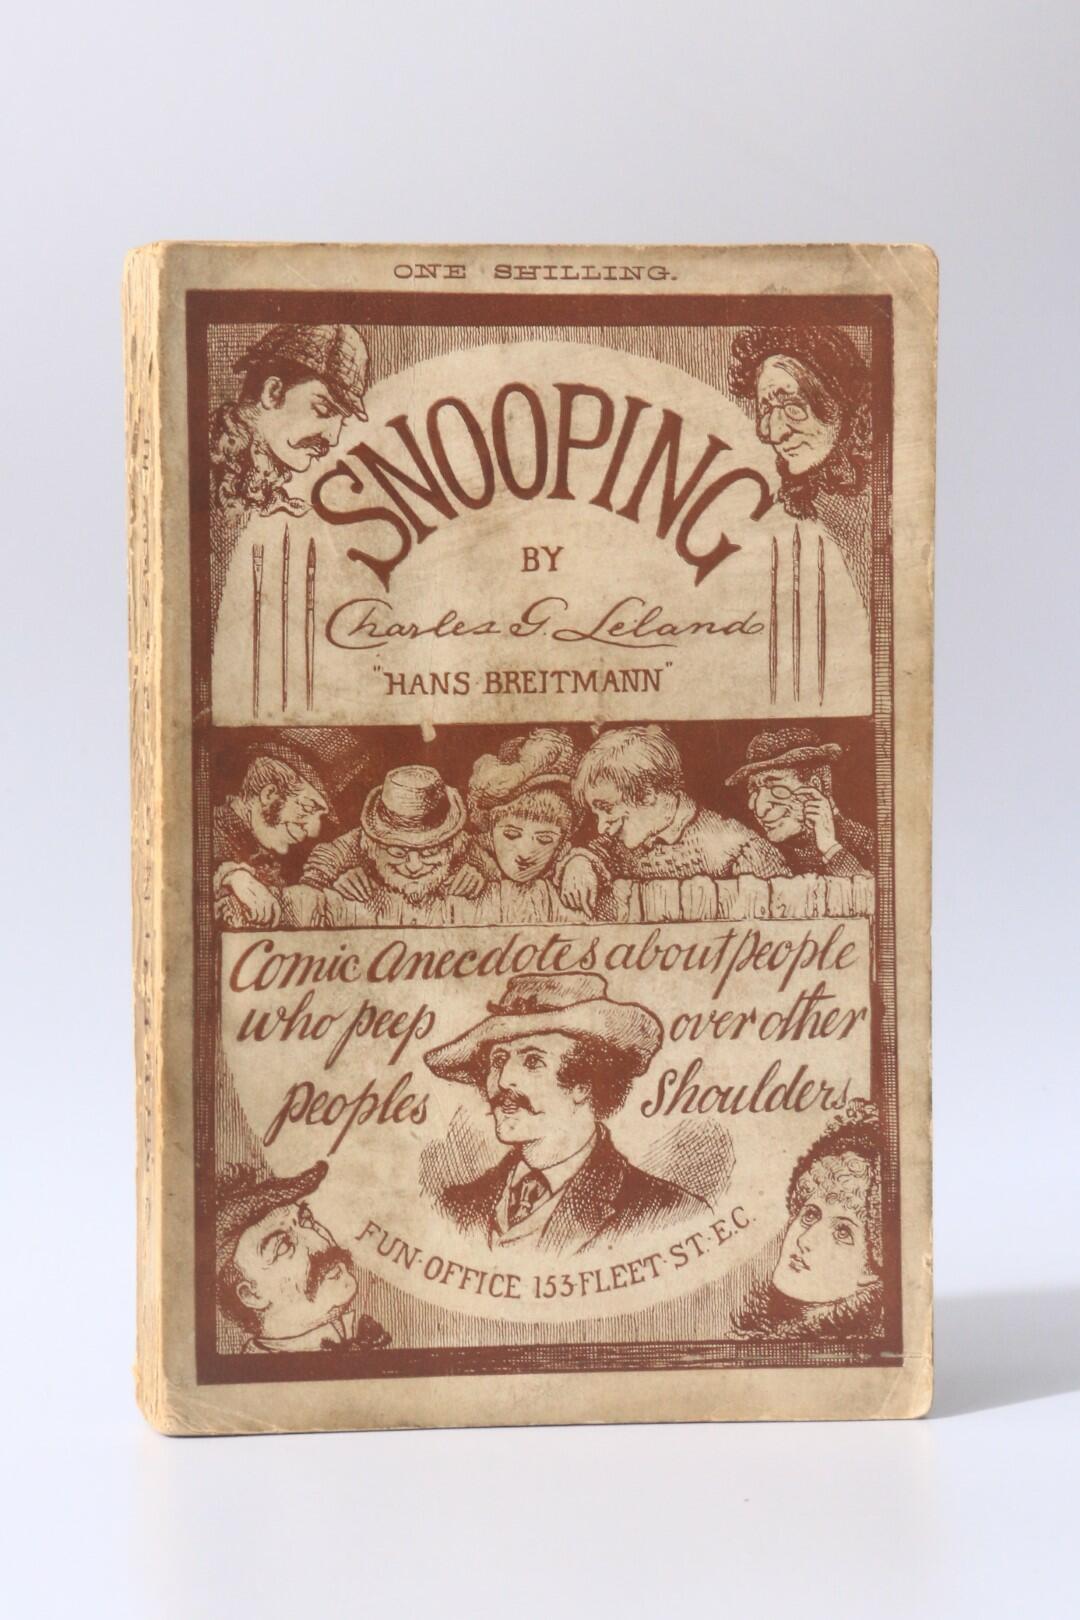 Charles G. Leland - Snooping: Comic Anecdotes About People Who Peep Over Other People's Shoulders - Fun' Office, nd [1885], First Edition.